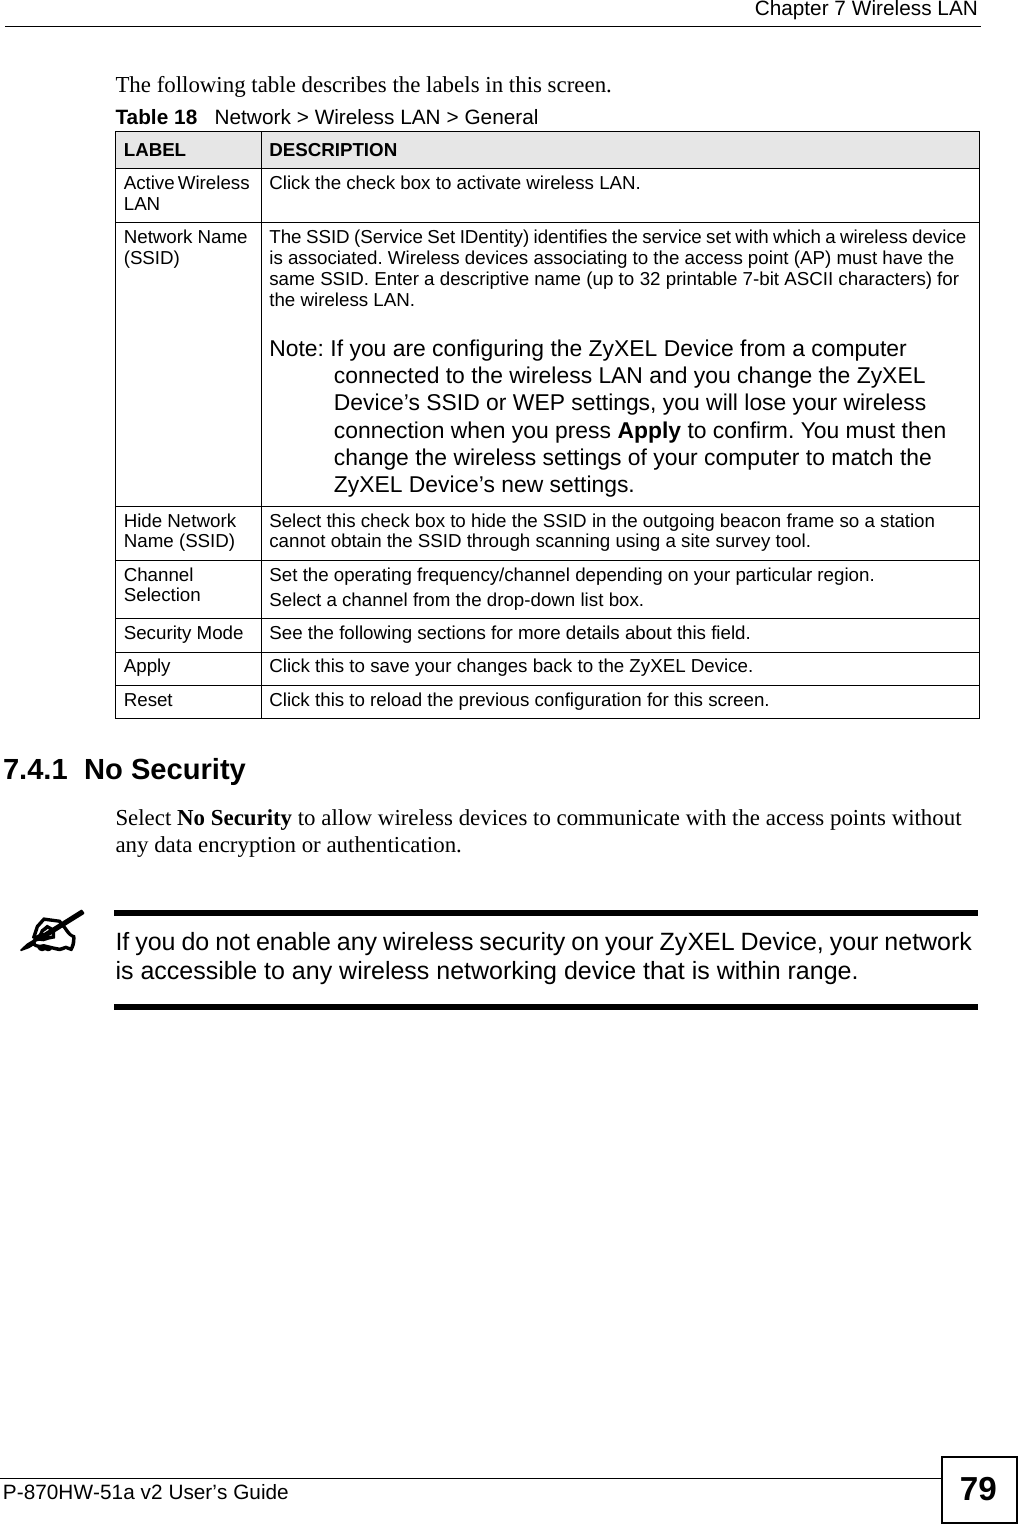  Chapter 7 Wireless LANP-870HW-51a v2 User’s Guide 79The following table describes the labels in this screen.7.4.1  No SecuritySelect No Security to allow wireless devices to communicate with the access points without any data encryption or authentication. &quot;If you do not enable any wireless security on your ZyXEL Device, your network is accessible to any wireless networking device that is within range.Table 18   Network &gt; Wireless LAN &gt; GeneralLABEL DESCRIPTIONActive Wireless LAN Click the check box to activate wireless LAN.Network Name (SSID) The SSID (Service Set IDentity) identifies the service set with which a wireless device is associated. Wireless devices associating to the access point (AP) must have the same SSID. Enter a descriptive name (up to 32 printable 7-bit ASCII characters) for the wireless LAN. Note: If you are configuring the ZyXEL Device from a computer connected to the wireless LAN and you change the ZyXEL Device’s SSID or WEP settings, you will lose your wireless connection when you press Apply to confirm. You must then change the wireless settings of your computer to match the ZyXEL Device’s new settings.Hide Network Name (SSID) Select this check box to hide the SSID in the outgoing beacon frame so a station cannot obtain the SSID through scanning using a site survey tool.Channel Selection Set the operating frequency/channel depending on your particular region. Select a channel from the drop-down list box. Security Mode See the following sections for more details about this field.Apply Click this to save your changes back to the ZyXEL Device.Reset Click this to reload the previous configuration for this screen.